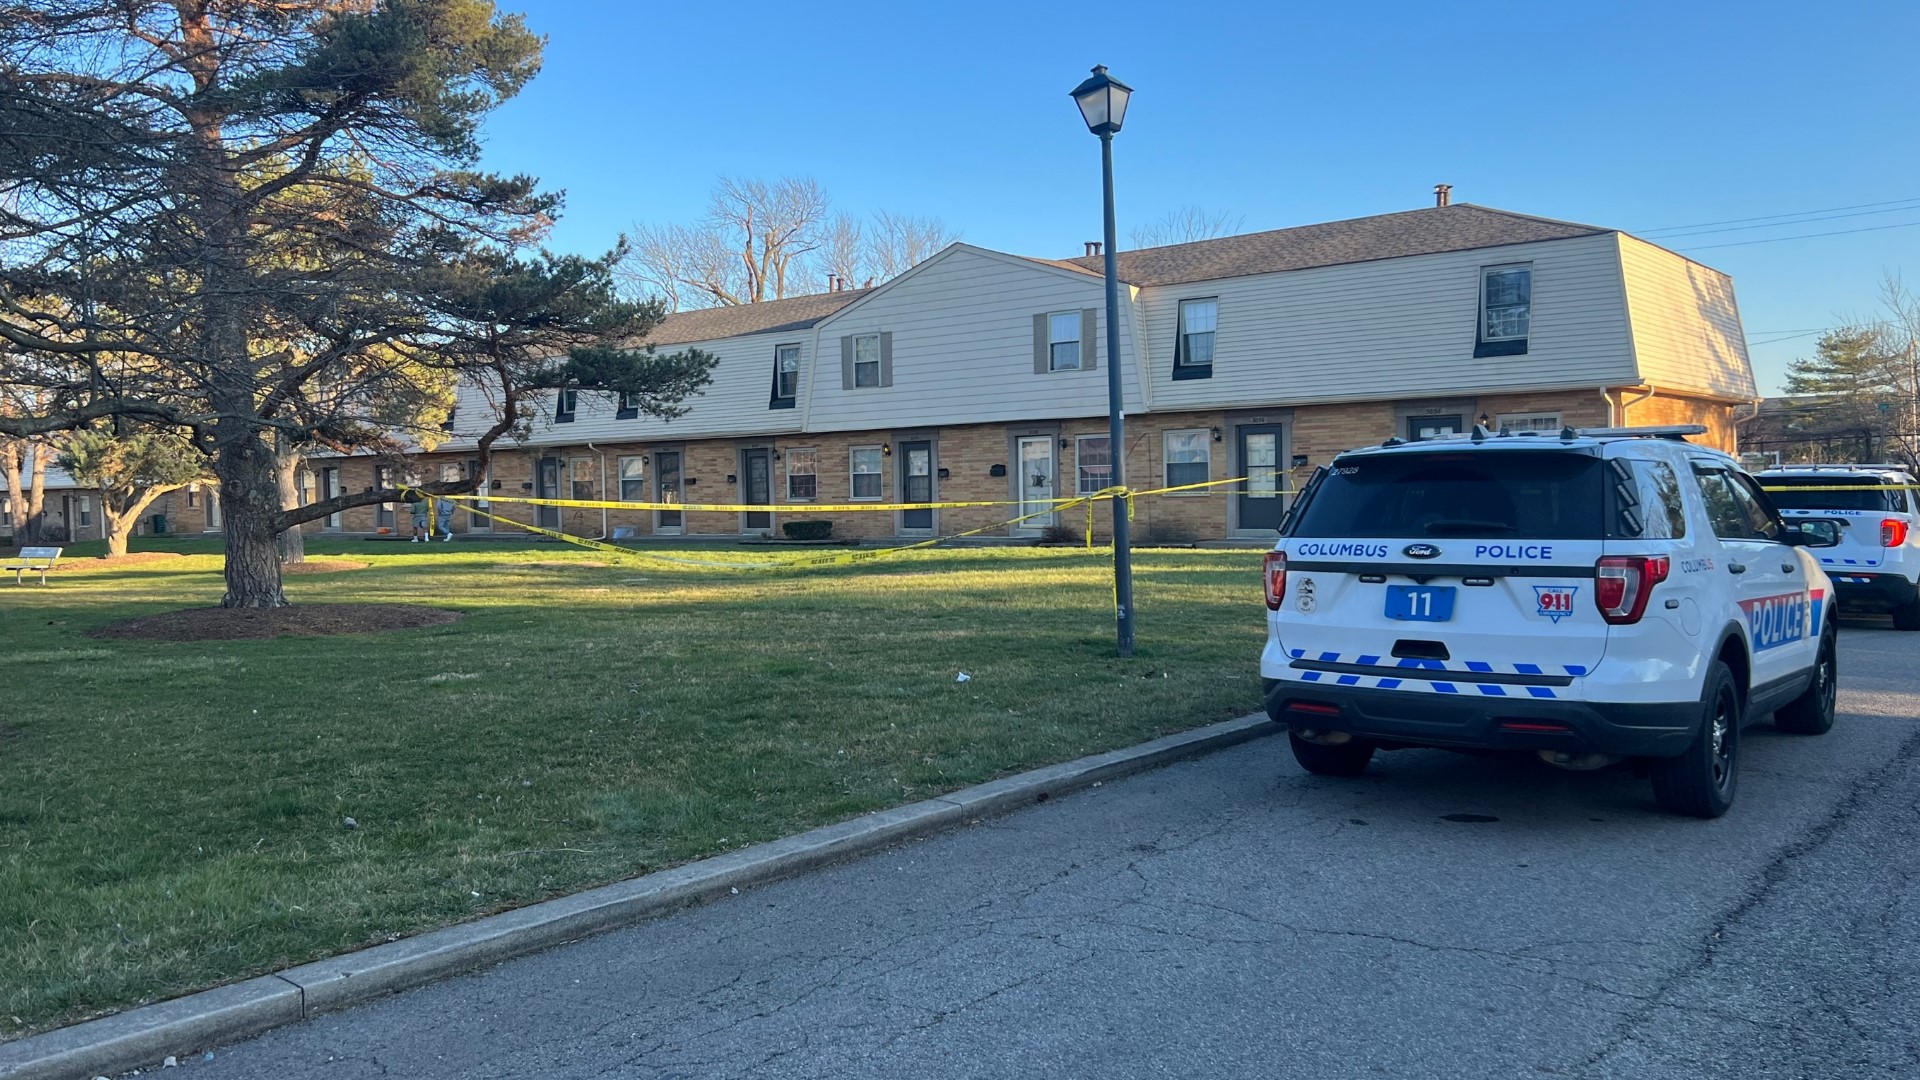 Officers were called to the 3000 block of Morsetown Court South in the Walnut Creek neighborhood of Columbus at 5:37 p.m. for a reported shooting.